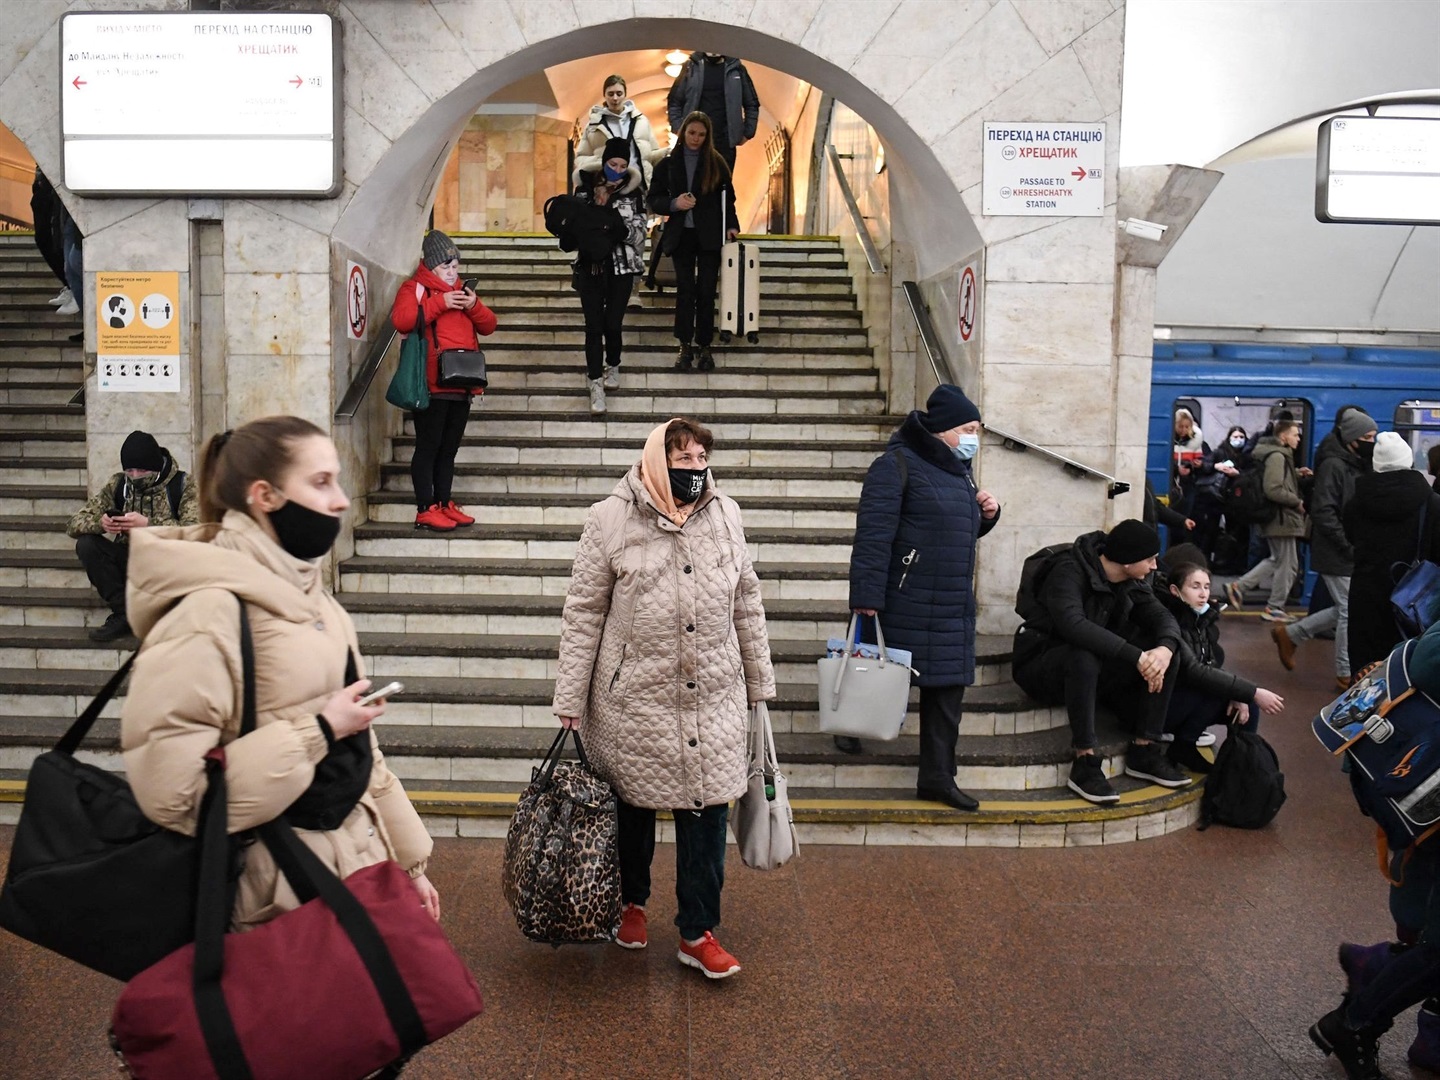 People, some carrying bags and suitcases, walk in a metro station in Kyiv early on February 24, 2022. Air raid sirens rang out in downtown Kyiv today as cities across Ukraine were hit with what Ukrainian officials said were Russian missile strikes and artillery.